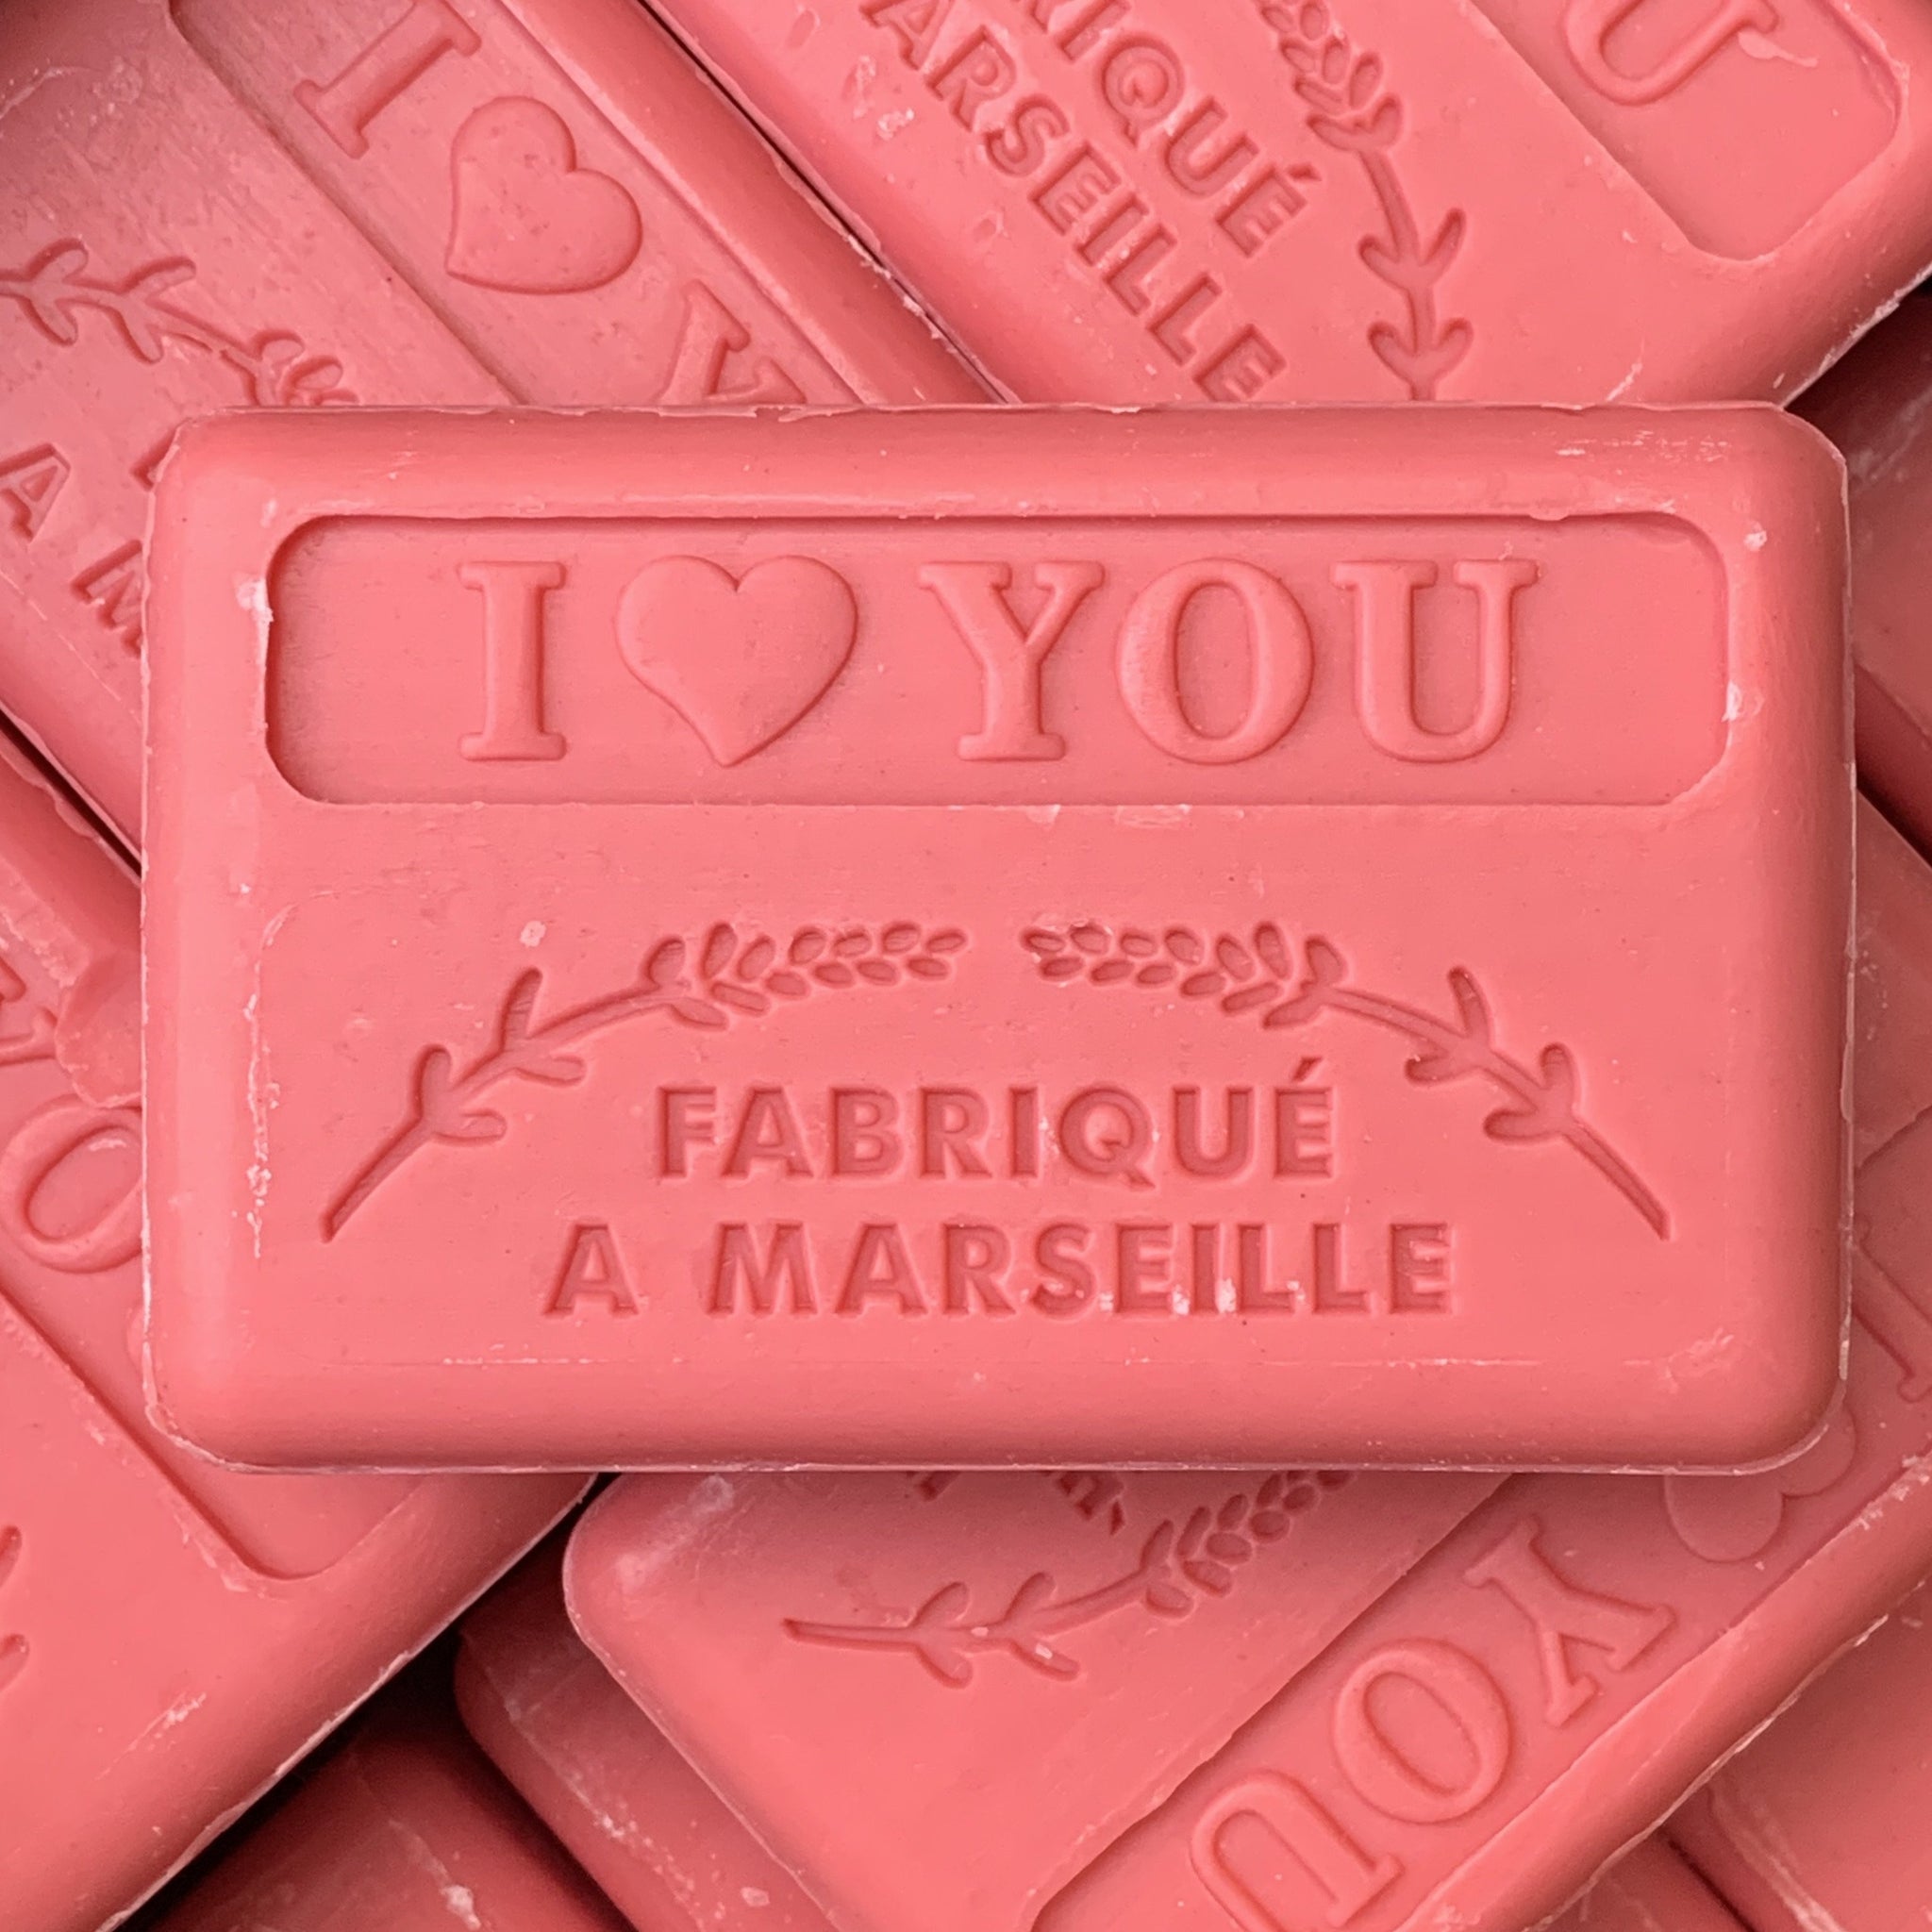 Choose from a selection of 18 different 'Savon De Marseille' 125g - Soap Bar with Organic Shea Butter